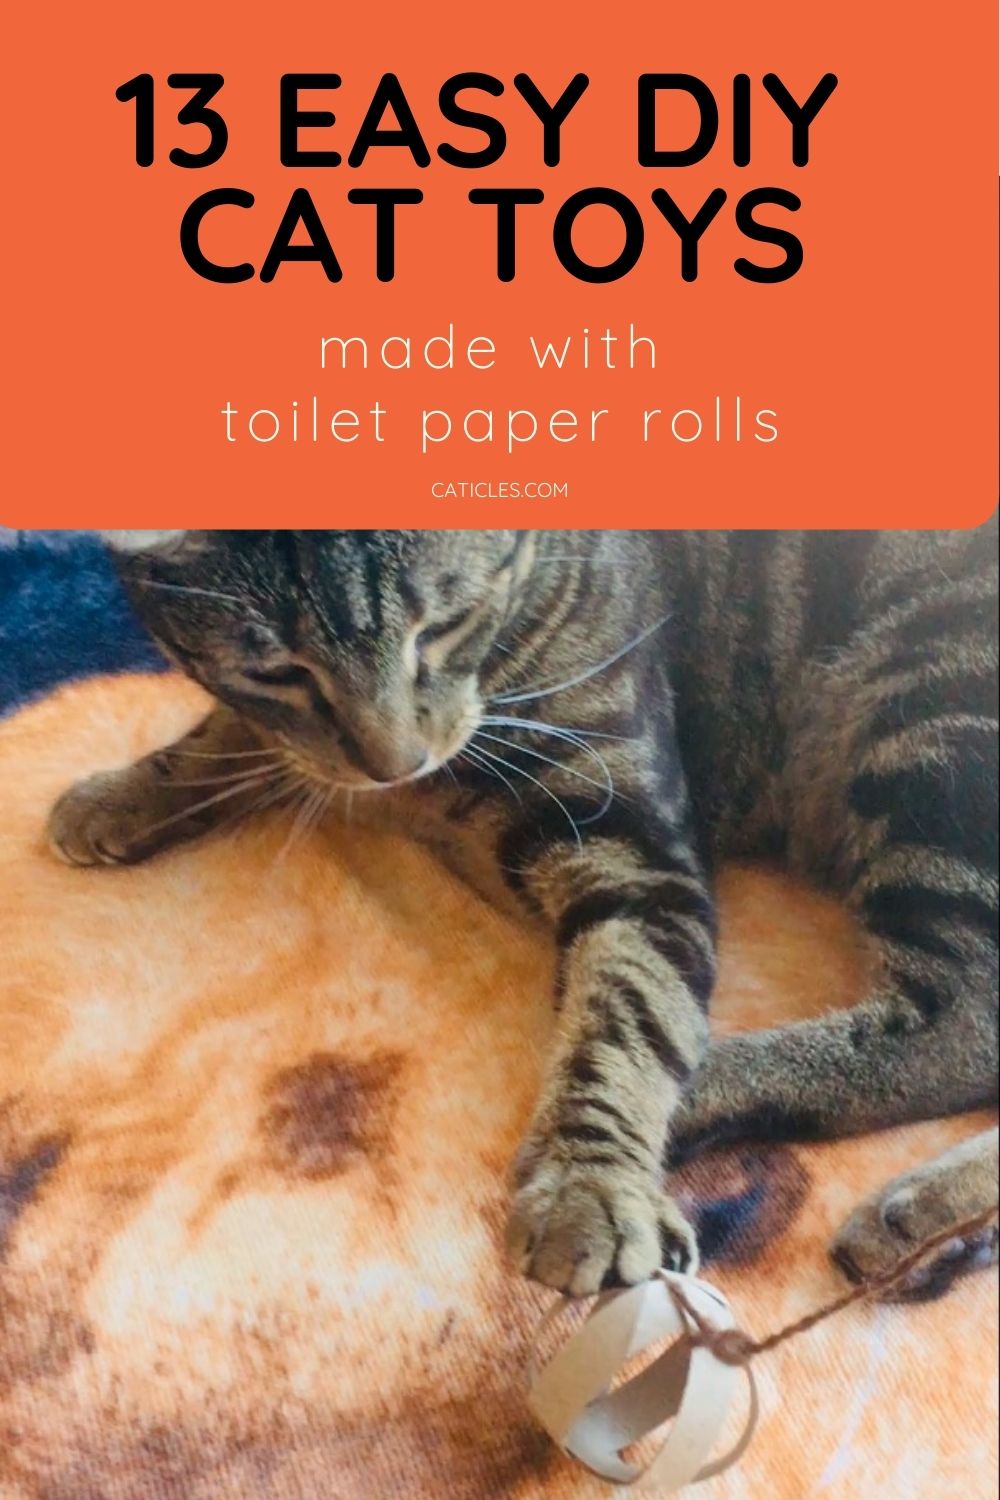 https://caticles.com/wp-content/uploads/2020/04/easy-diy-cat-toys-made-with-toilet-paper-rolls-caticles.jpg